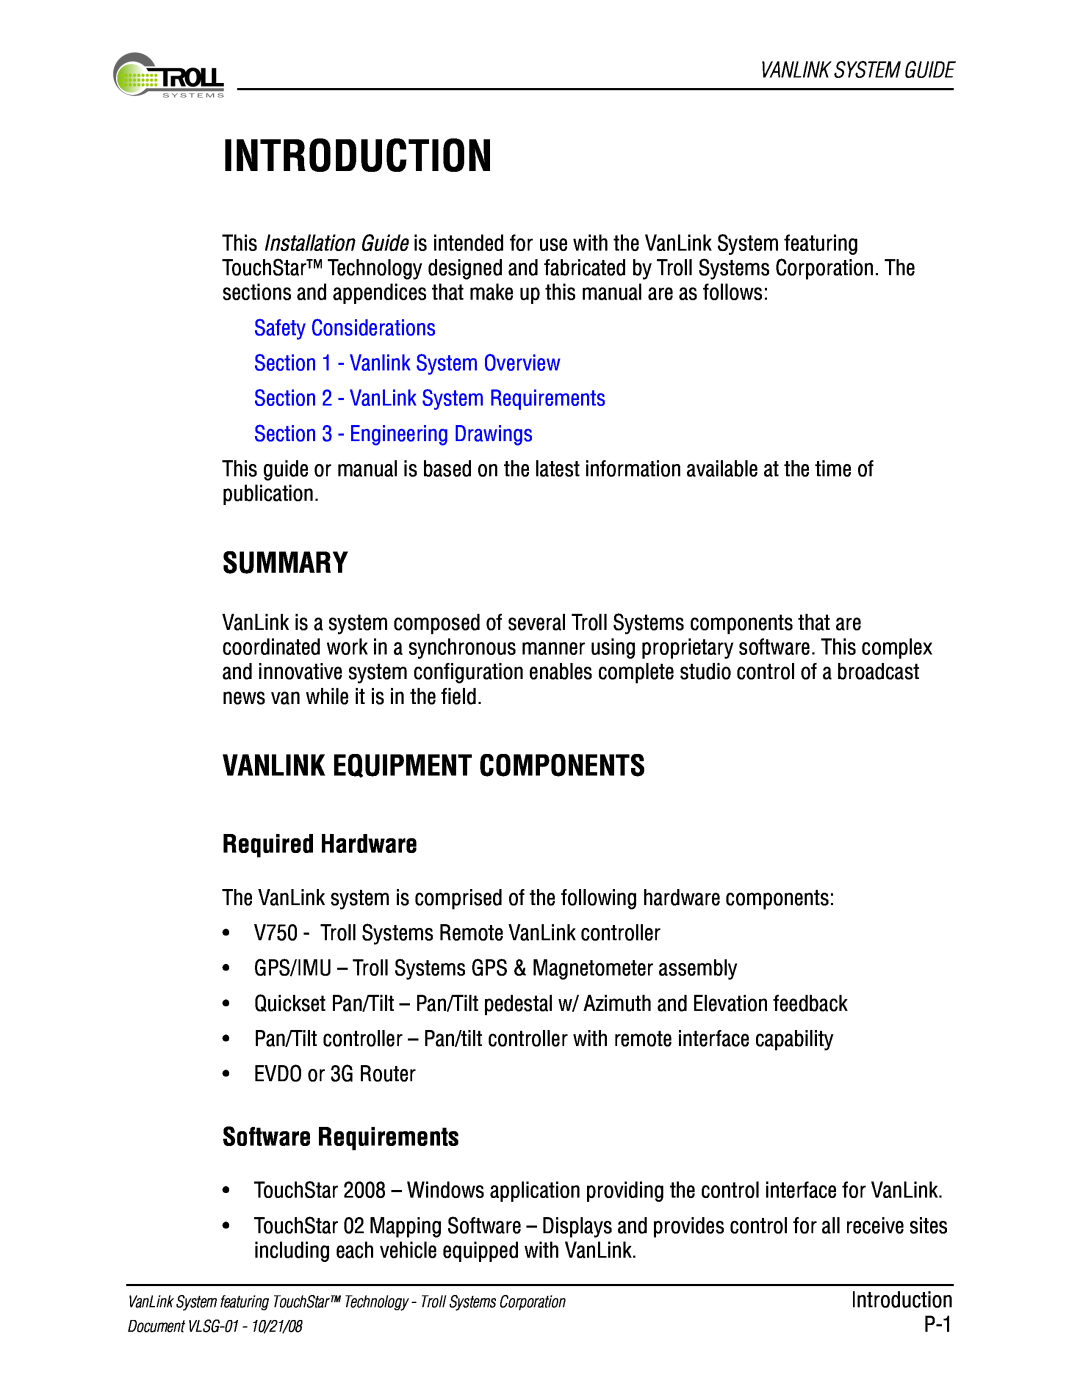 Kyocera VLSG-01 manual Introduction, Summary, Vanlink Equipment Components, Required Hardware, Software Requirements 